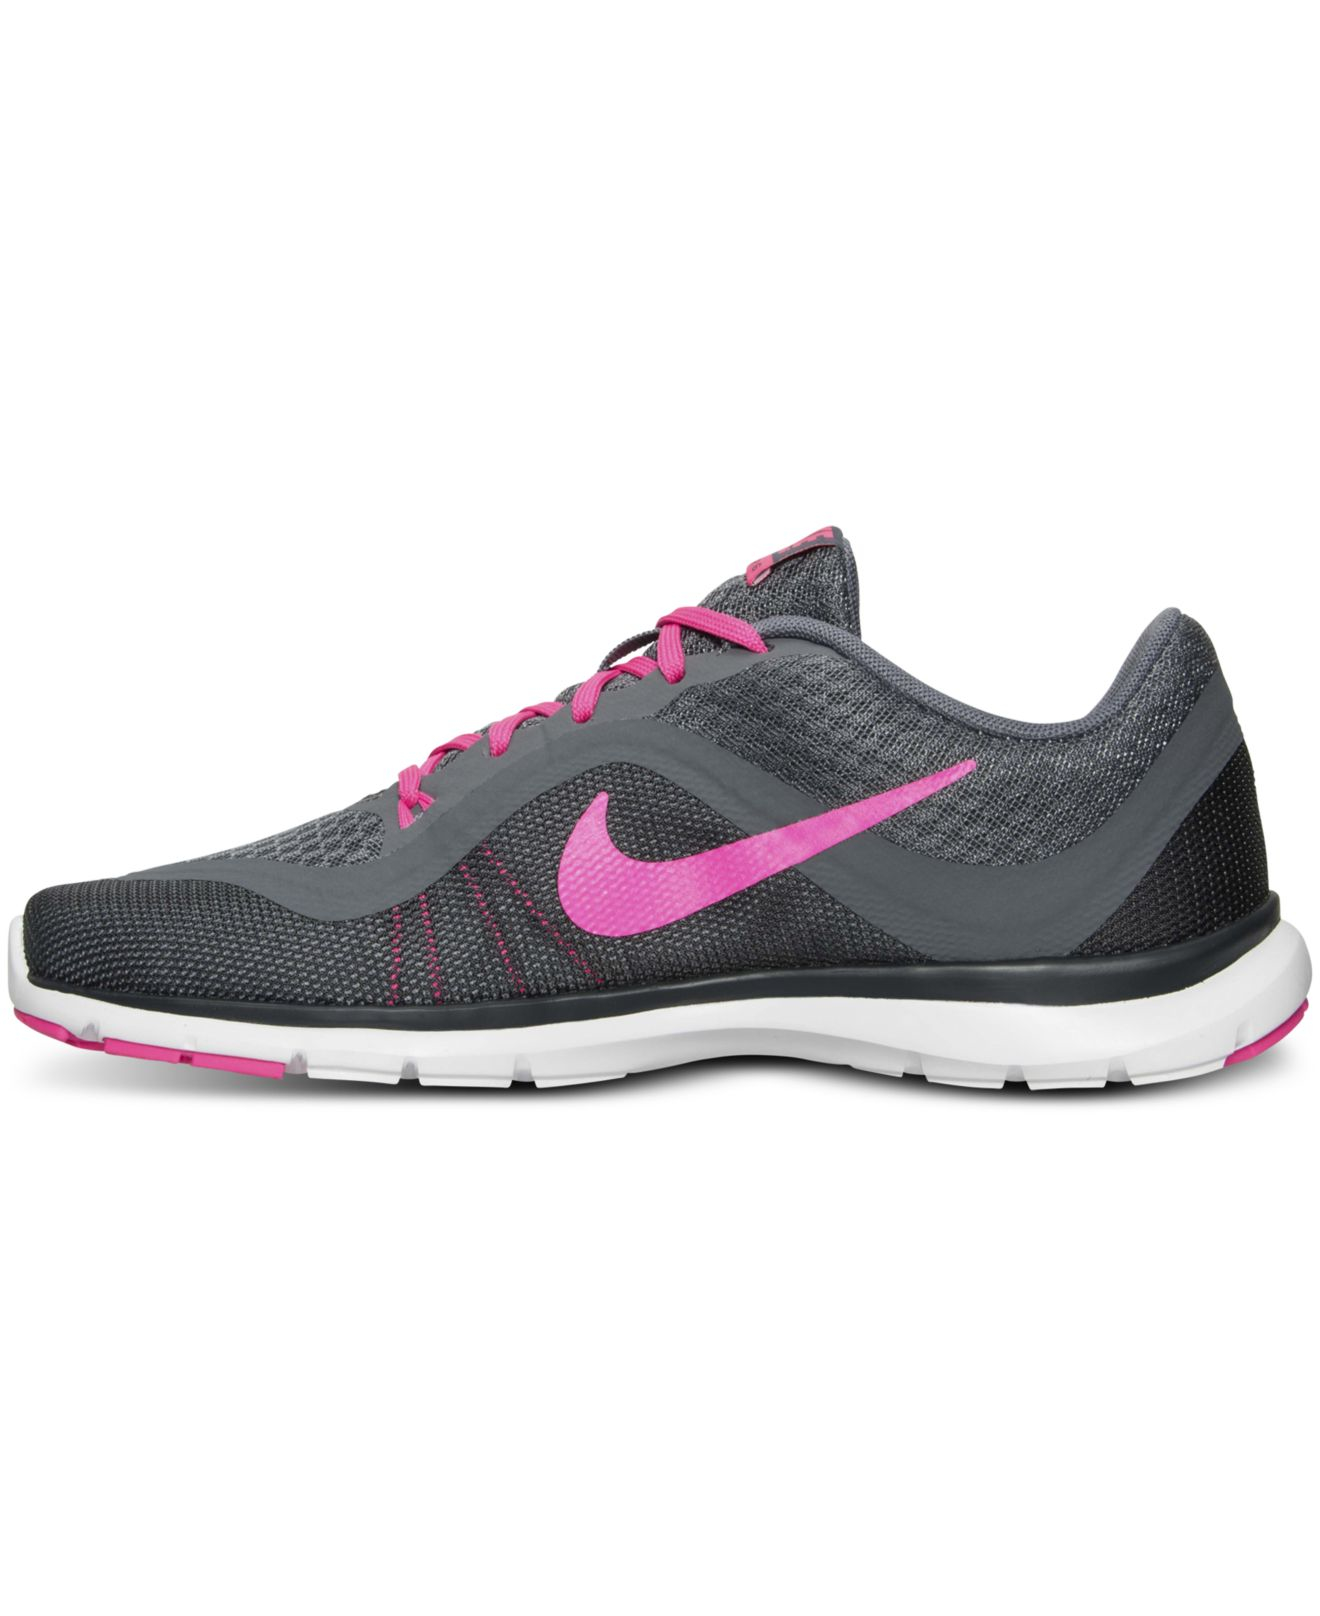 Nike Women's Flex Trainer 6 Training Sneakers From Finish Line - Lyst